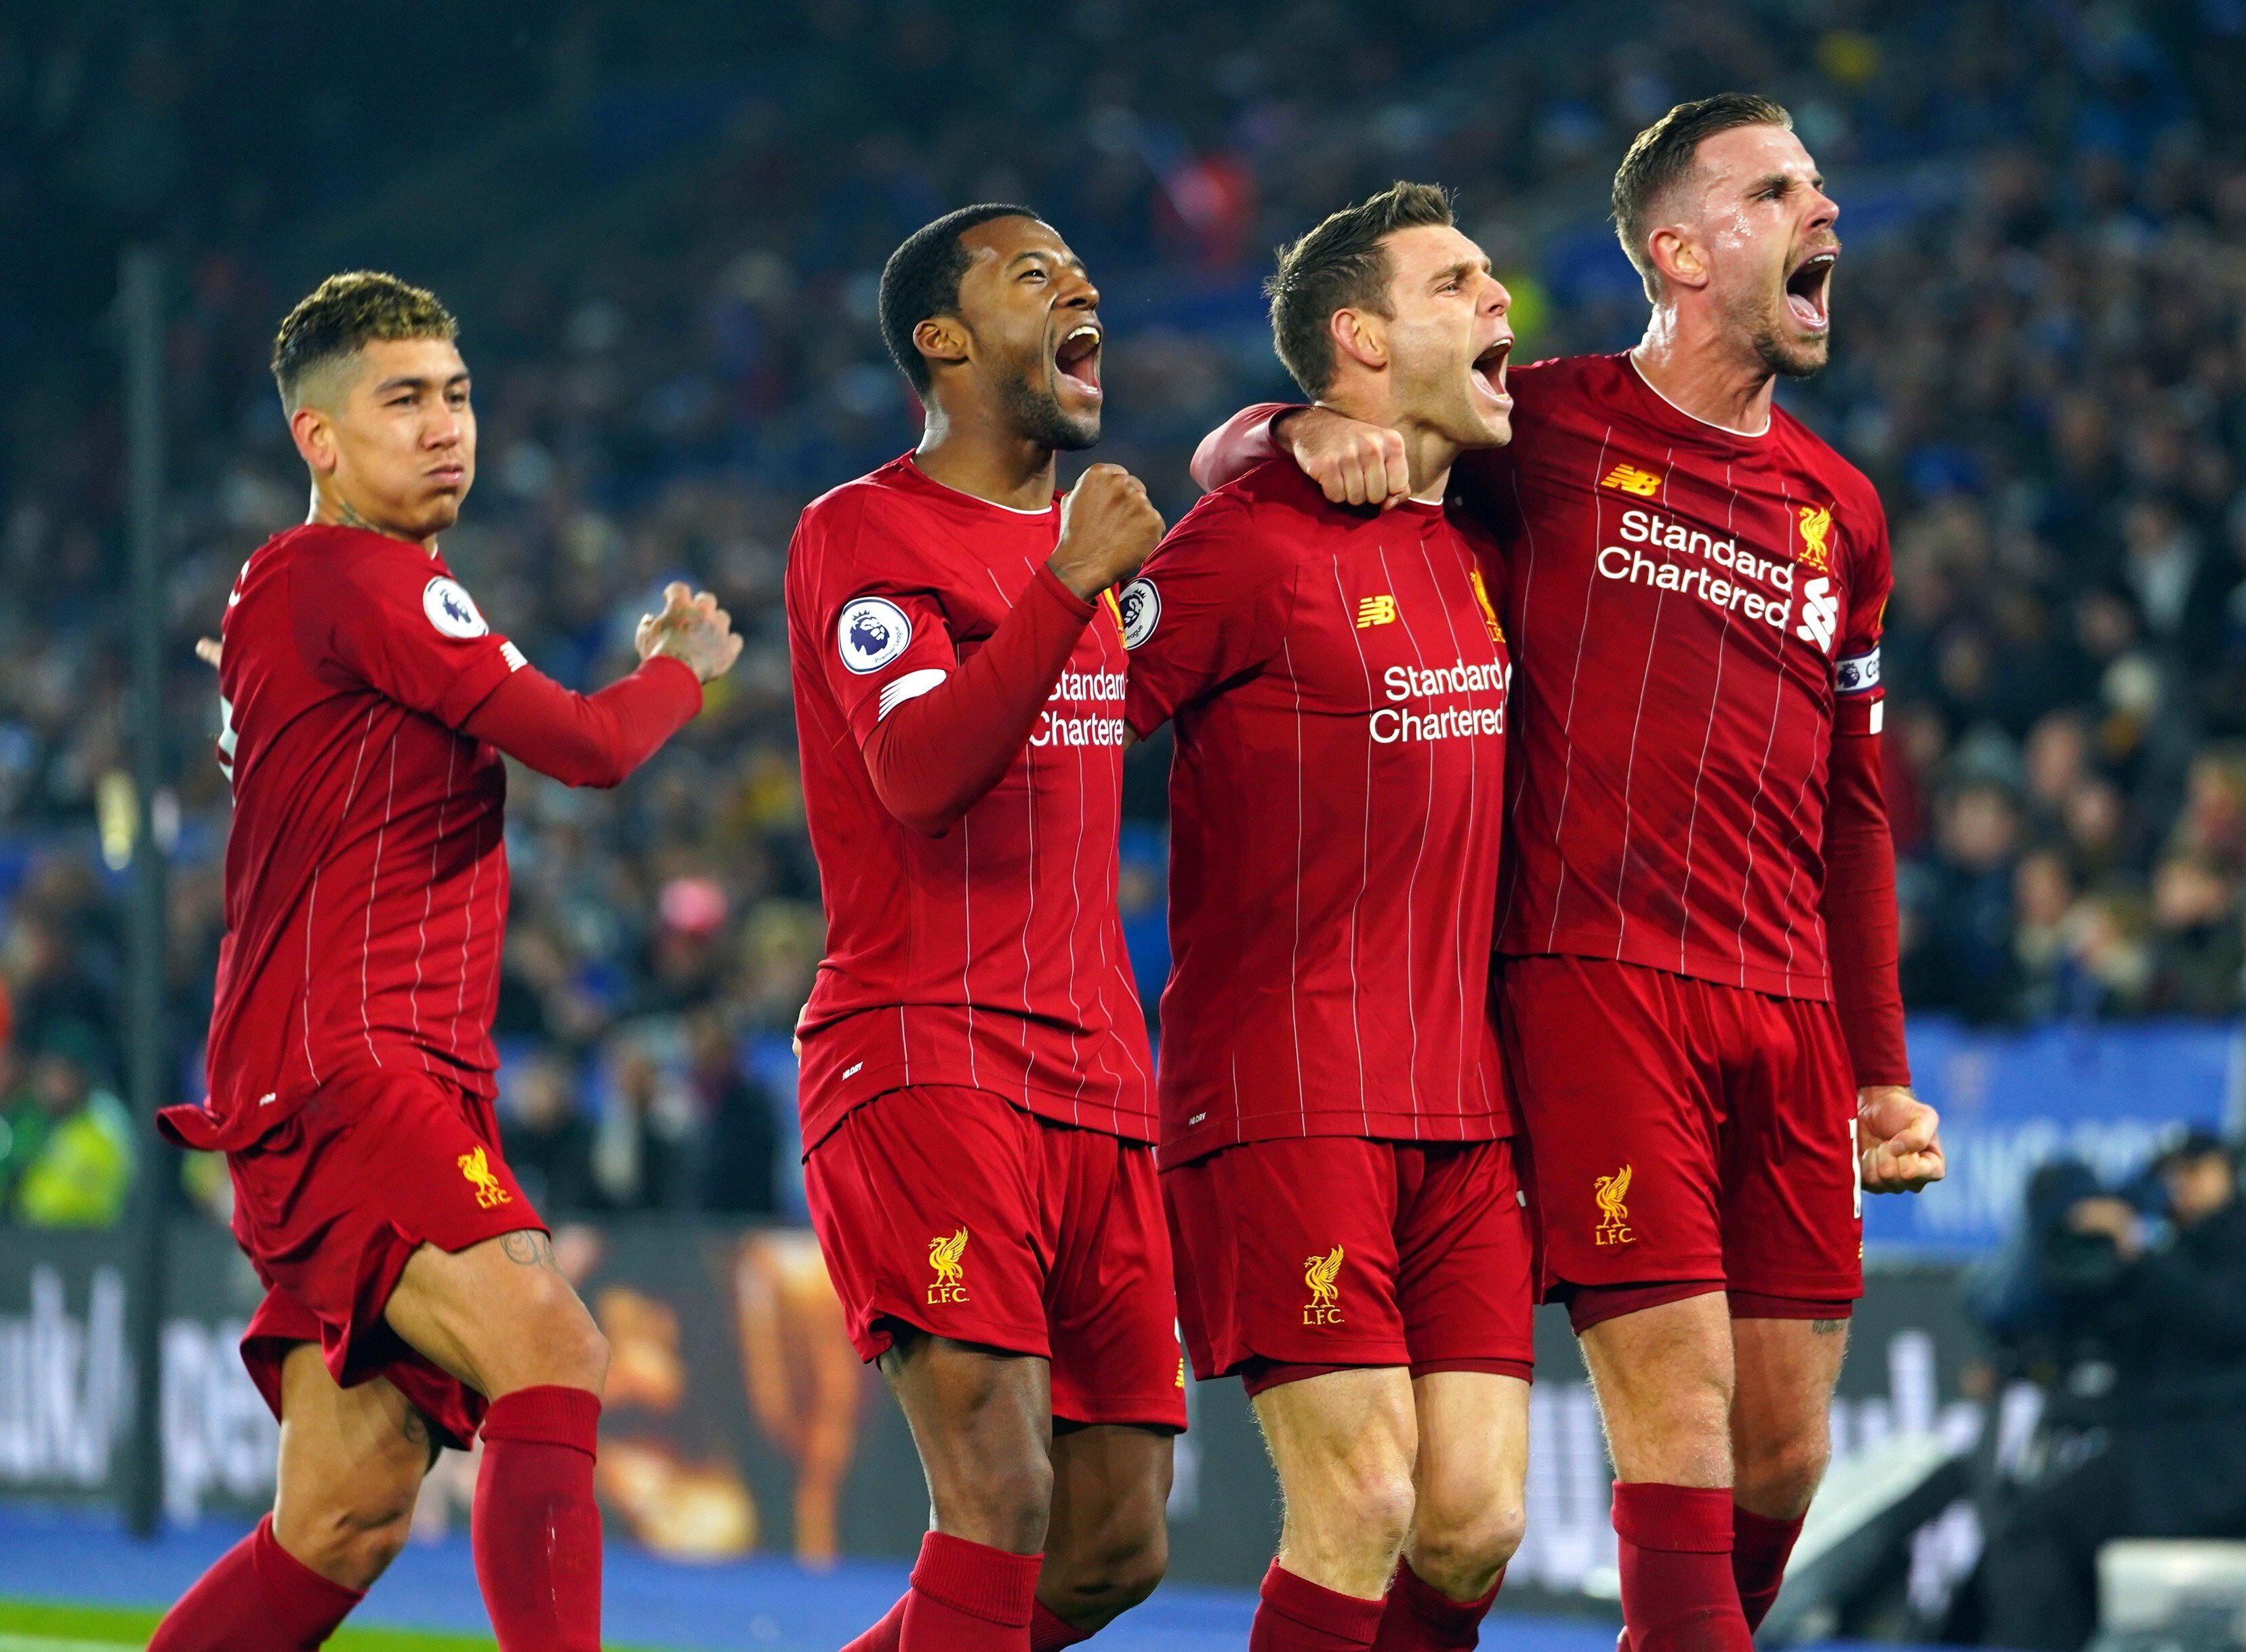 Liverpool are English Premier League champions – whenever it happens | South China Morning Post